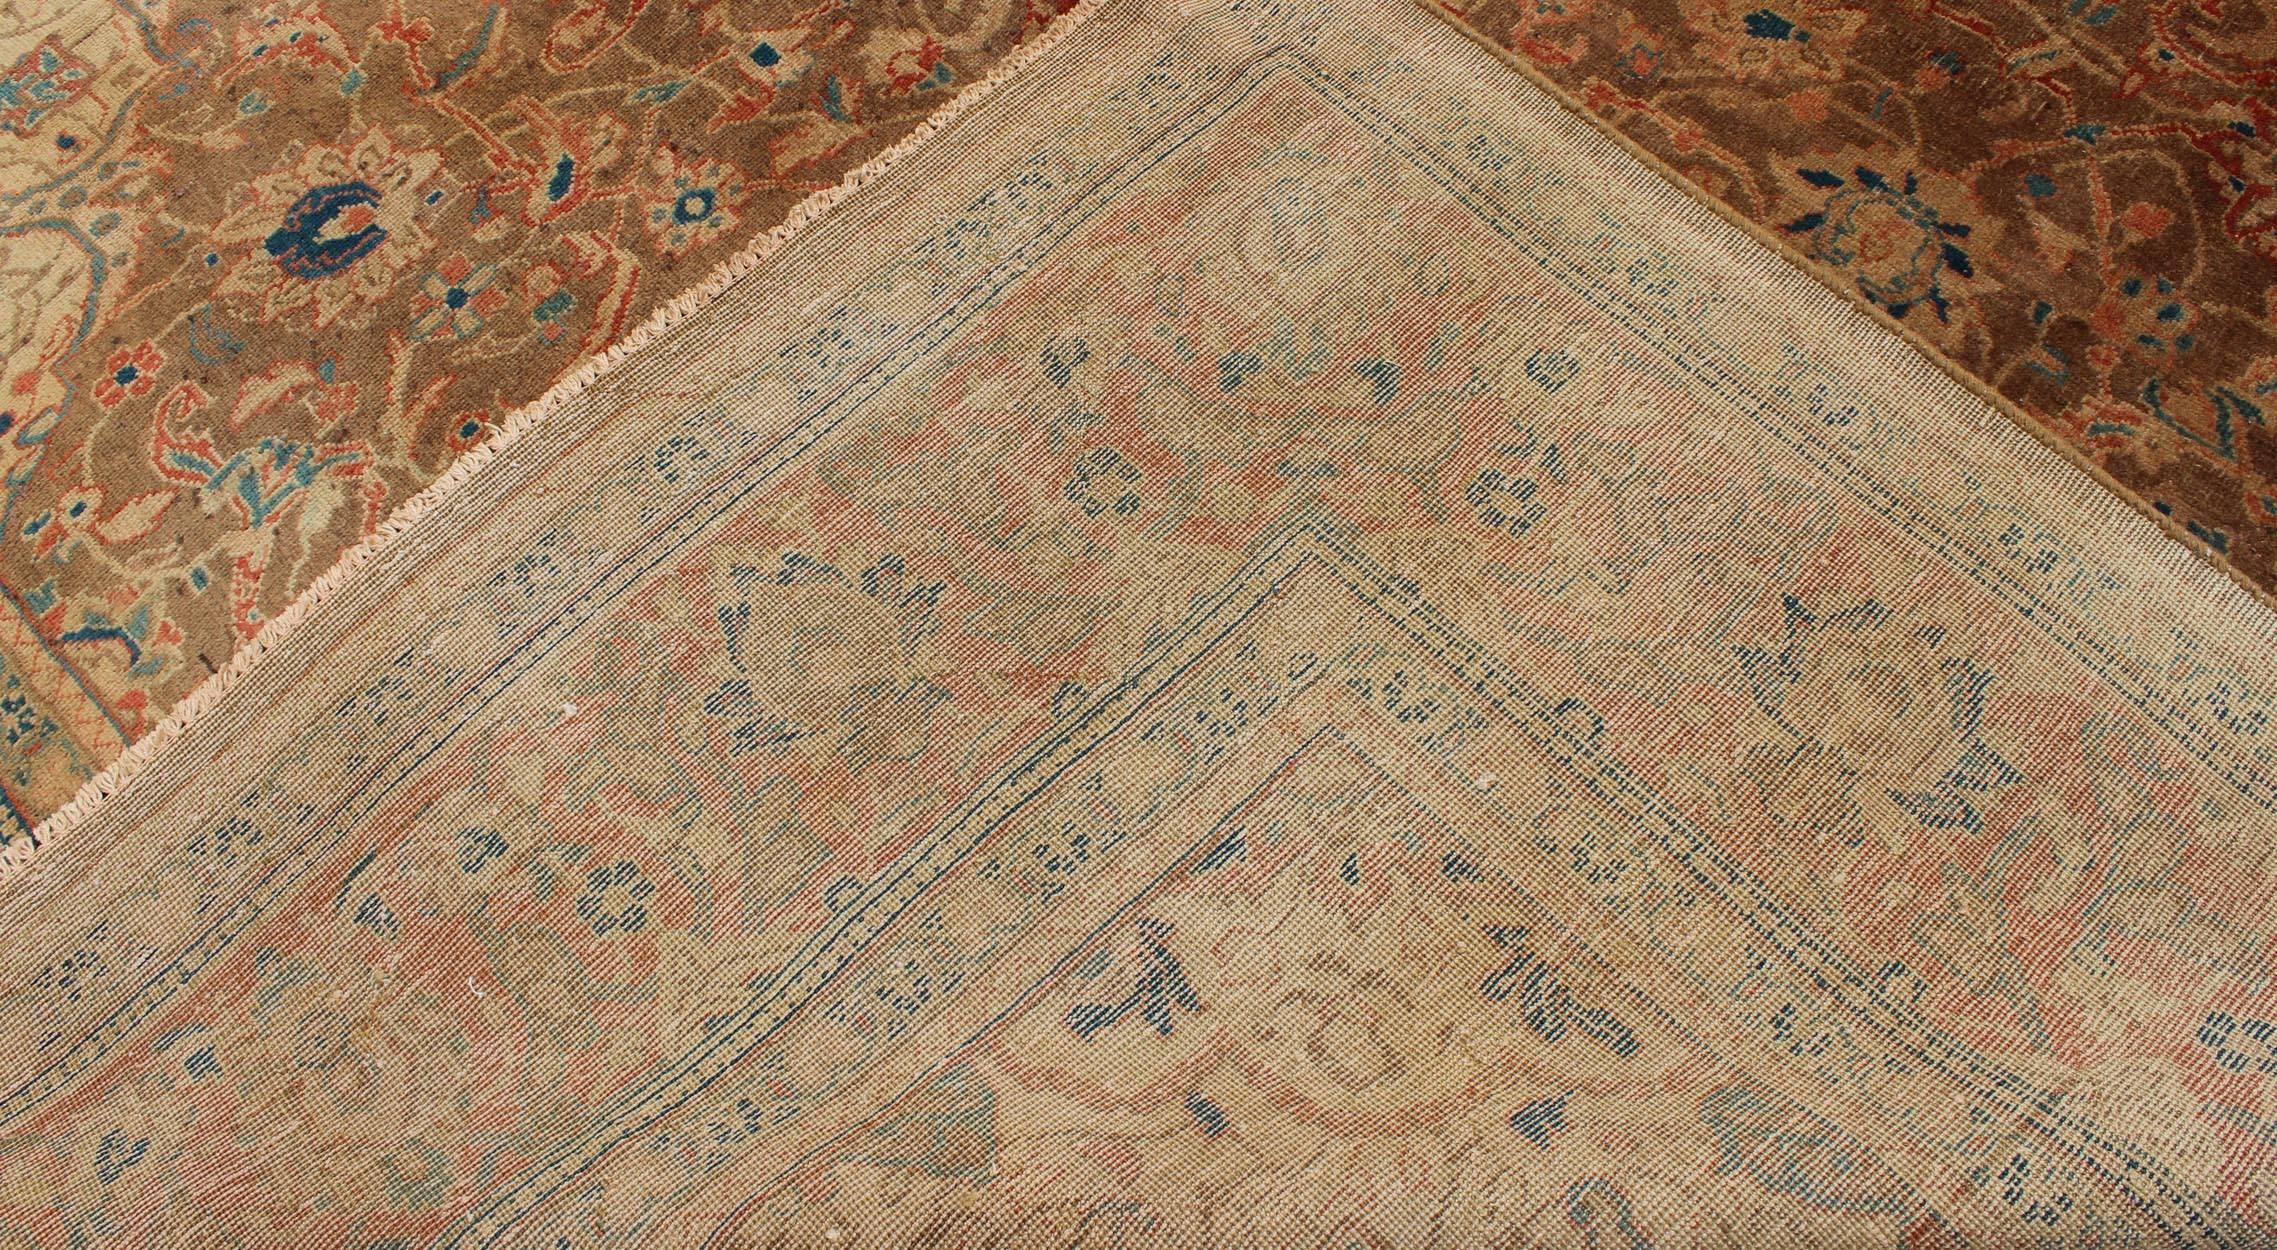 Antique Mahal Rug with Floral Pattern in Camel, Coral, Turquoise , Rust Red  In Good Condition For Sale In Atlanta, GA